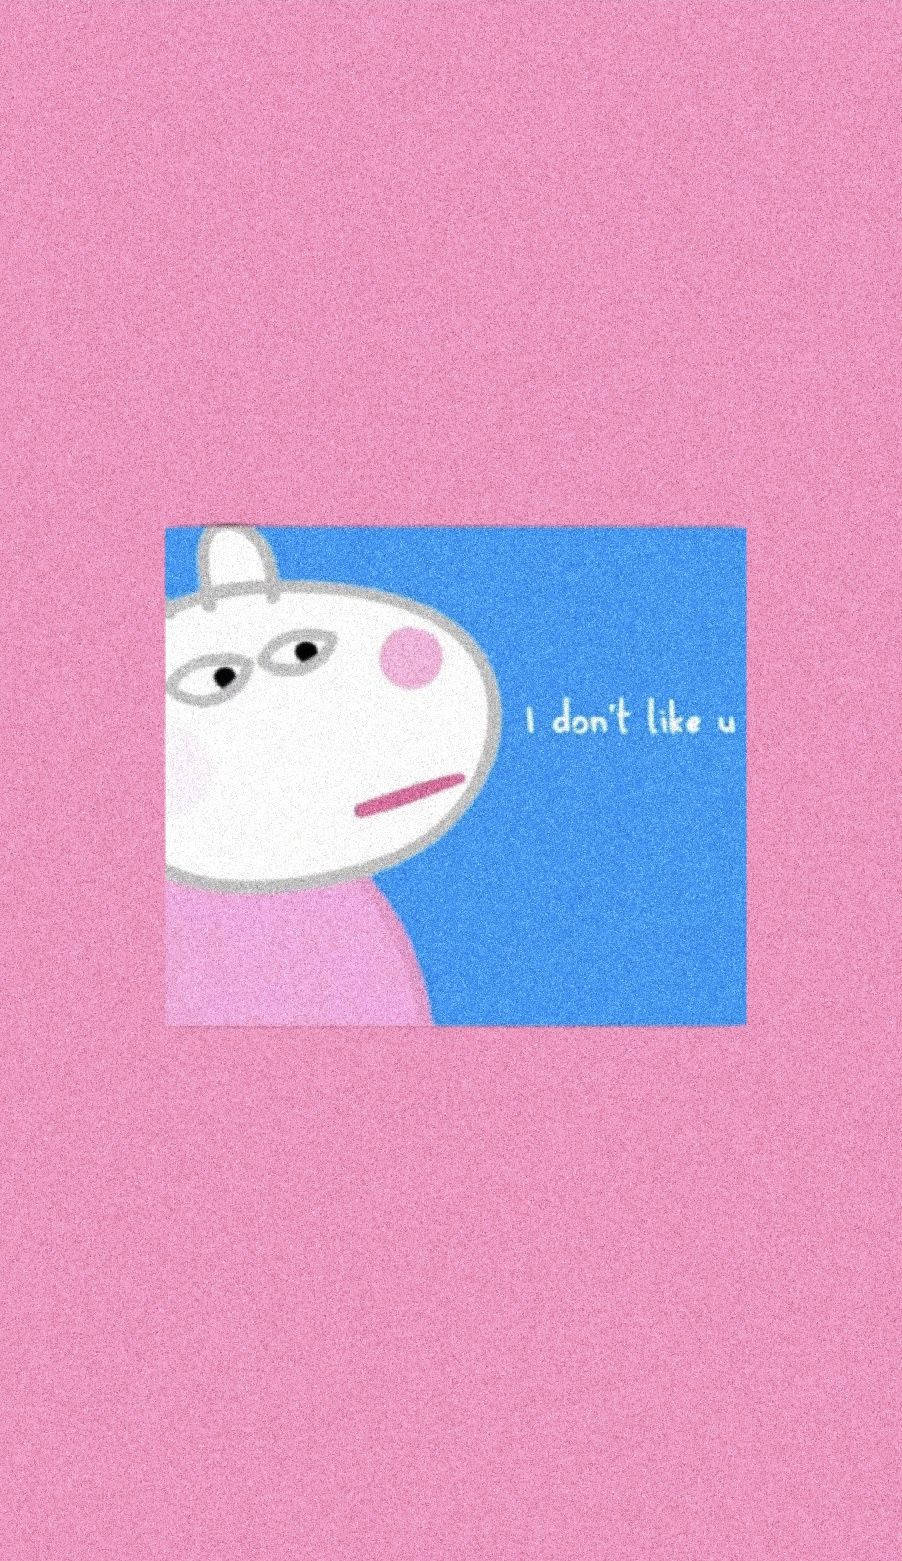 Peppa Pig Iphone Judging I Don't Like You Wallpaper